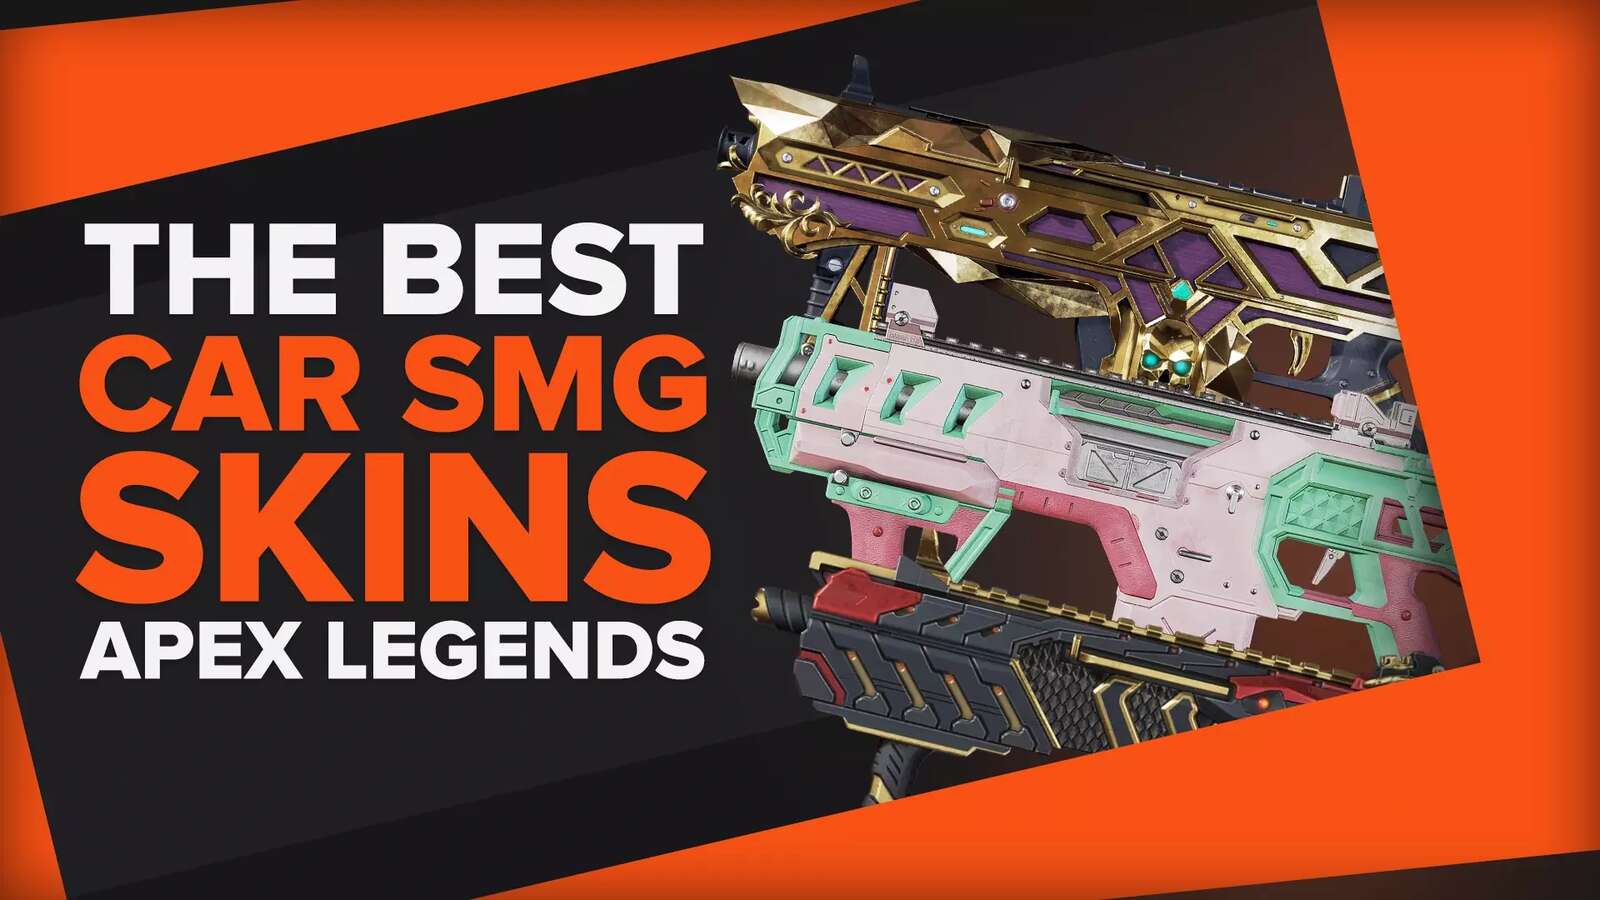 10 Best Skins For the CAR SMG in Apex Legends